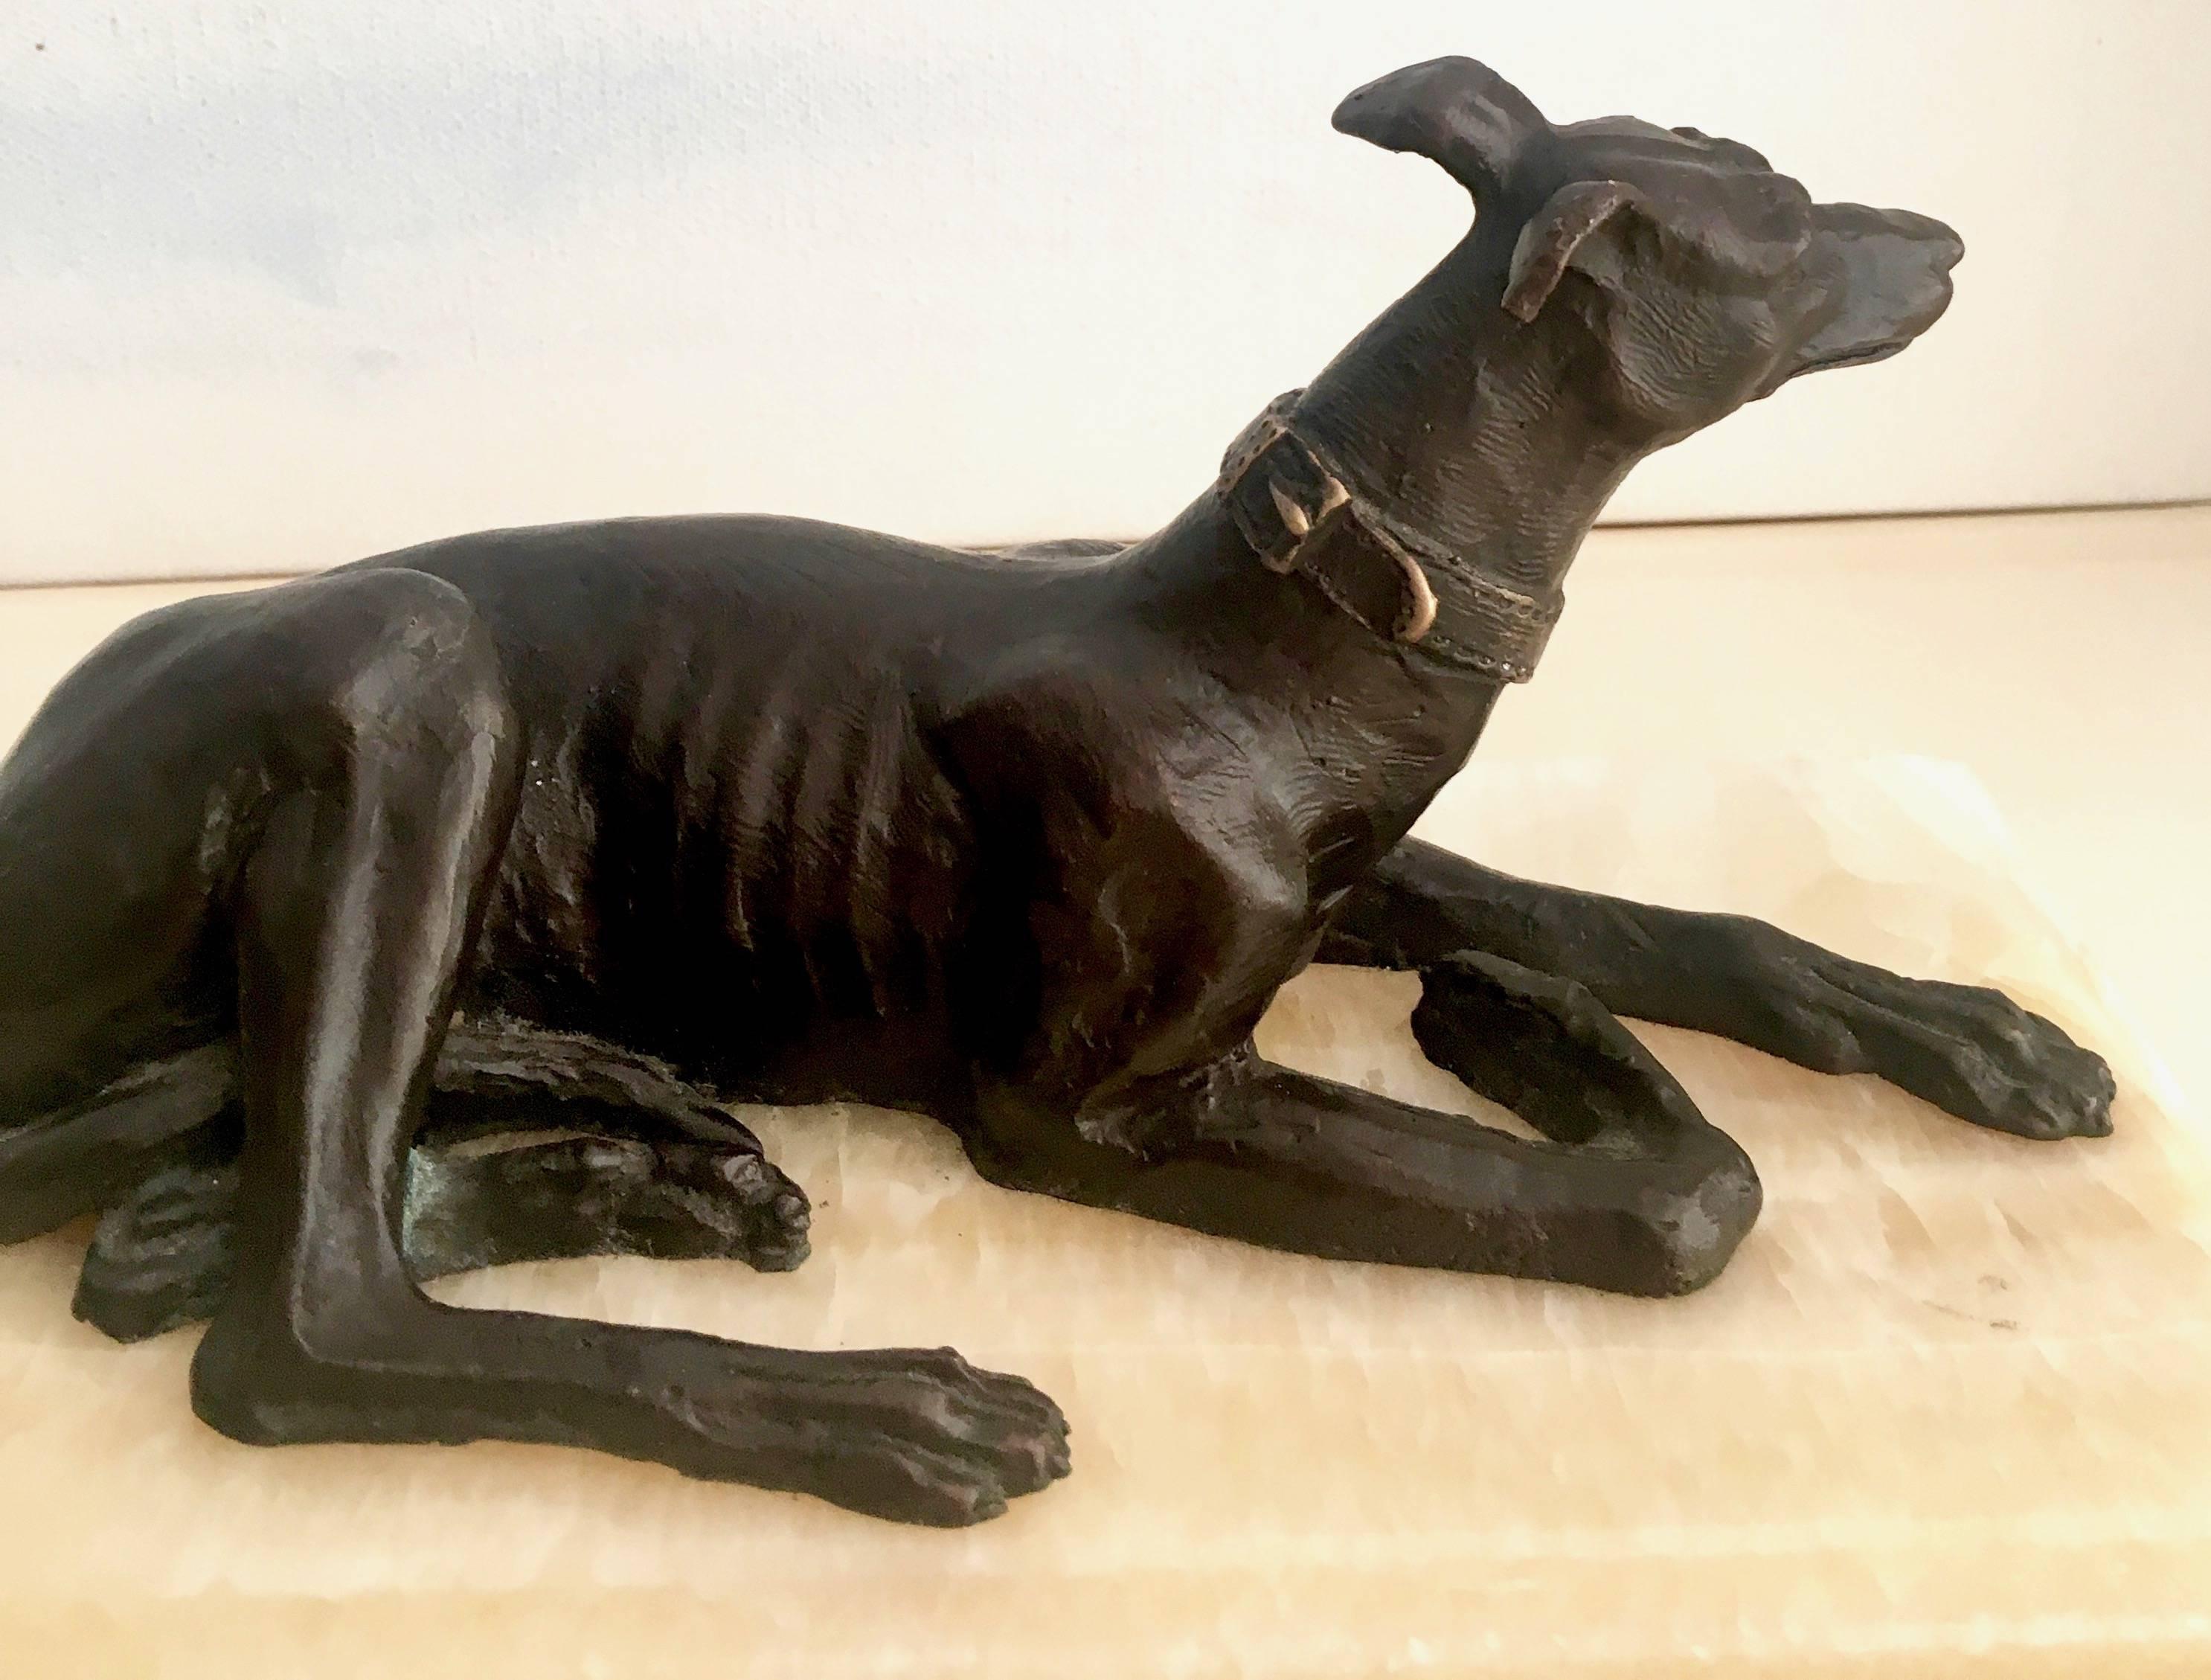 Exquisitely detailed bronze sculpture of a lounging Doberman, great for use as a paper weight or decorative item on a shelf or table.